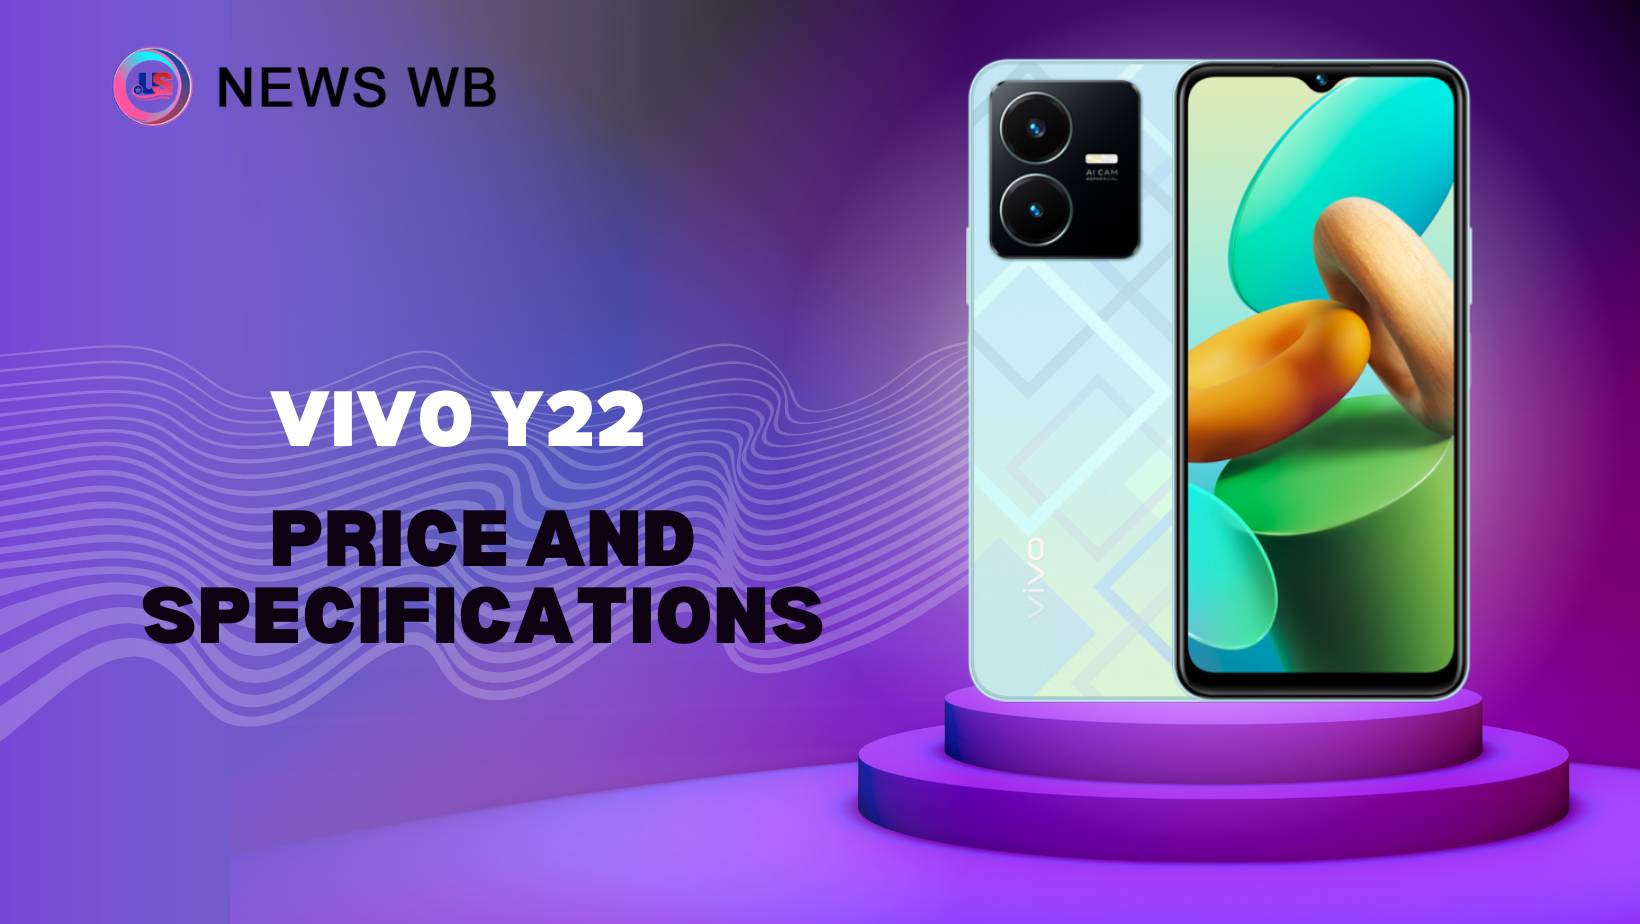 Vivo Y22 Price and Specifications